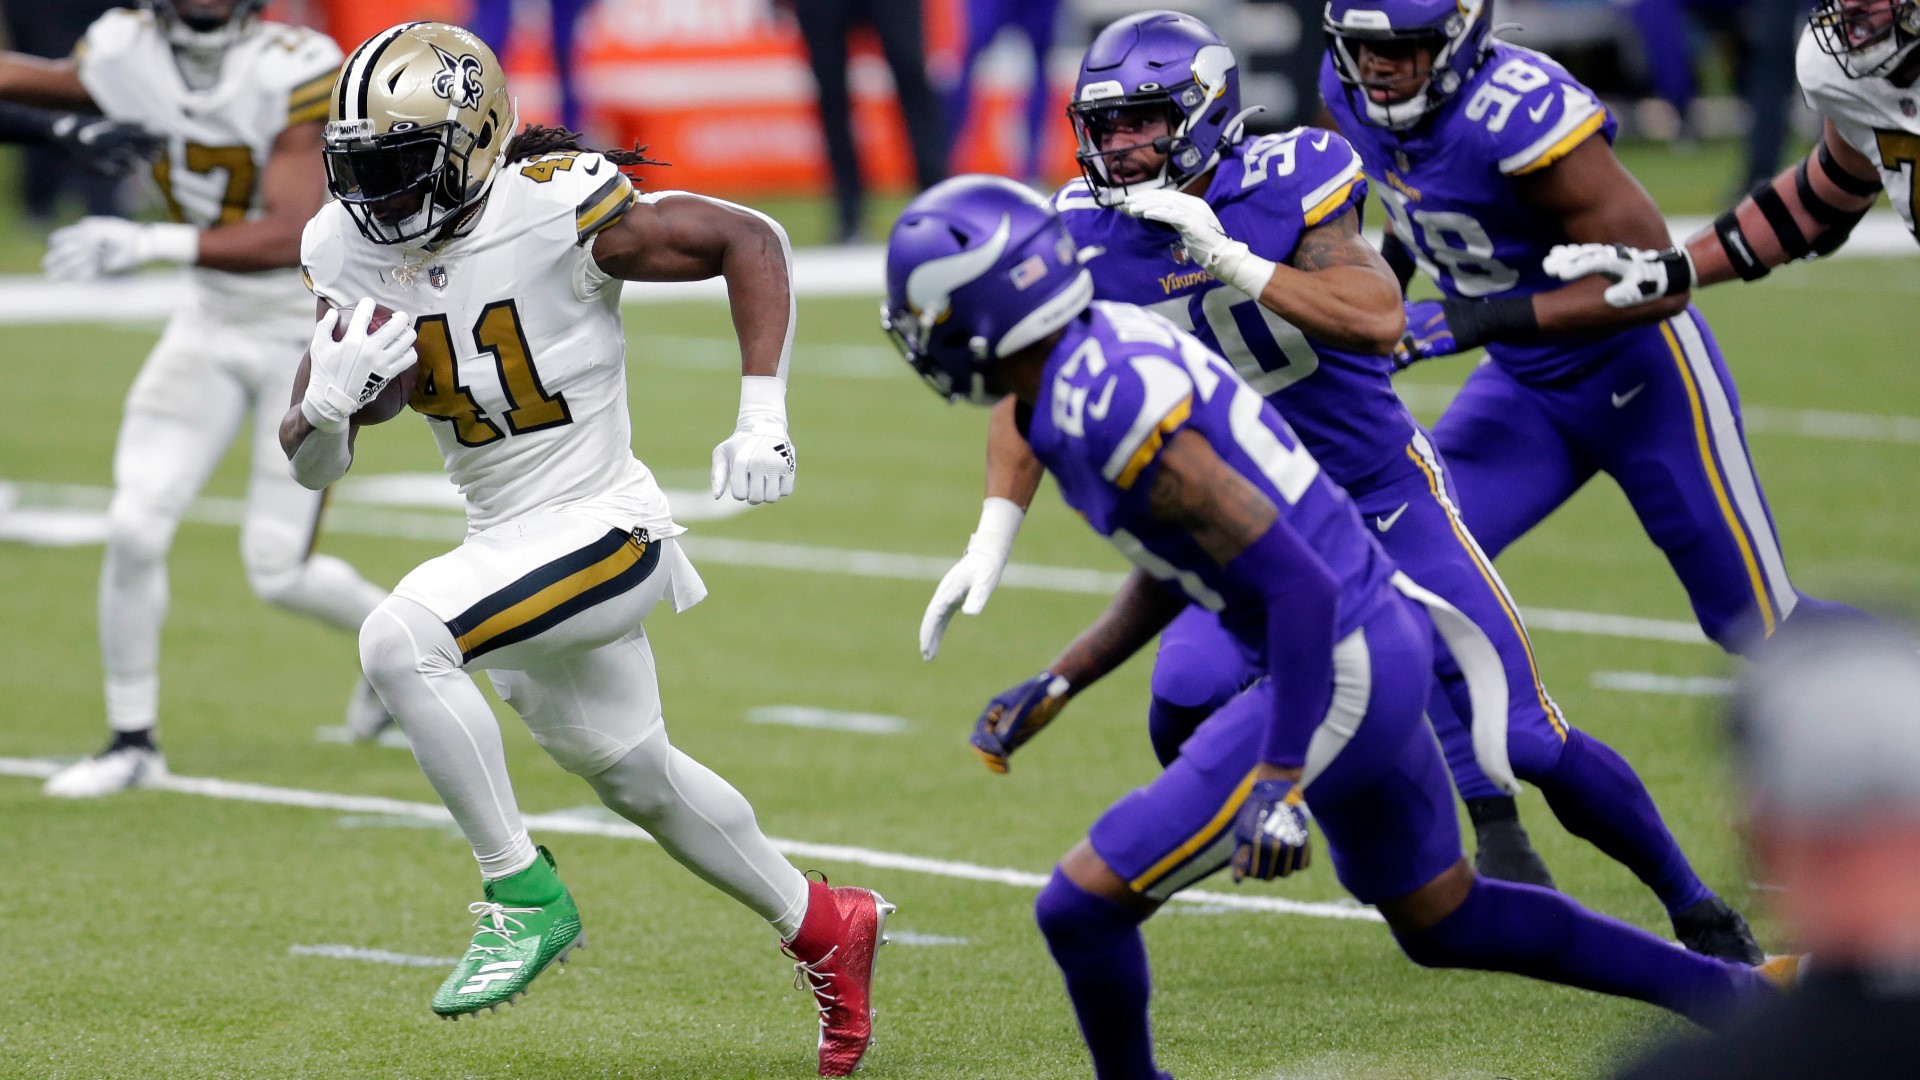 Alvin Kamara tied an NFL record by running for six touchdowns in a game and finished with a career-high 155 yards rushing to help New Orleans beat the Vikings.